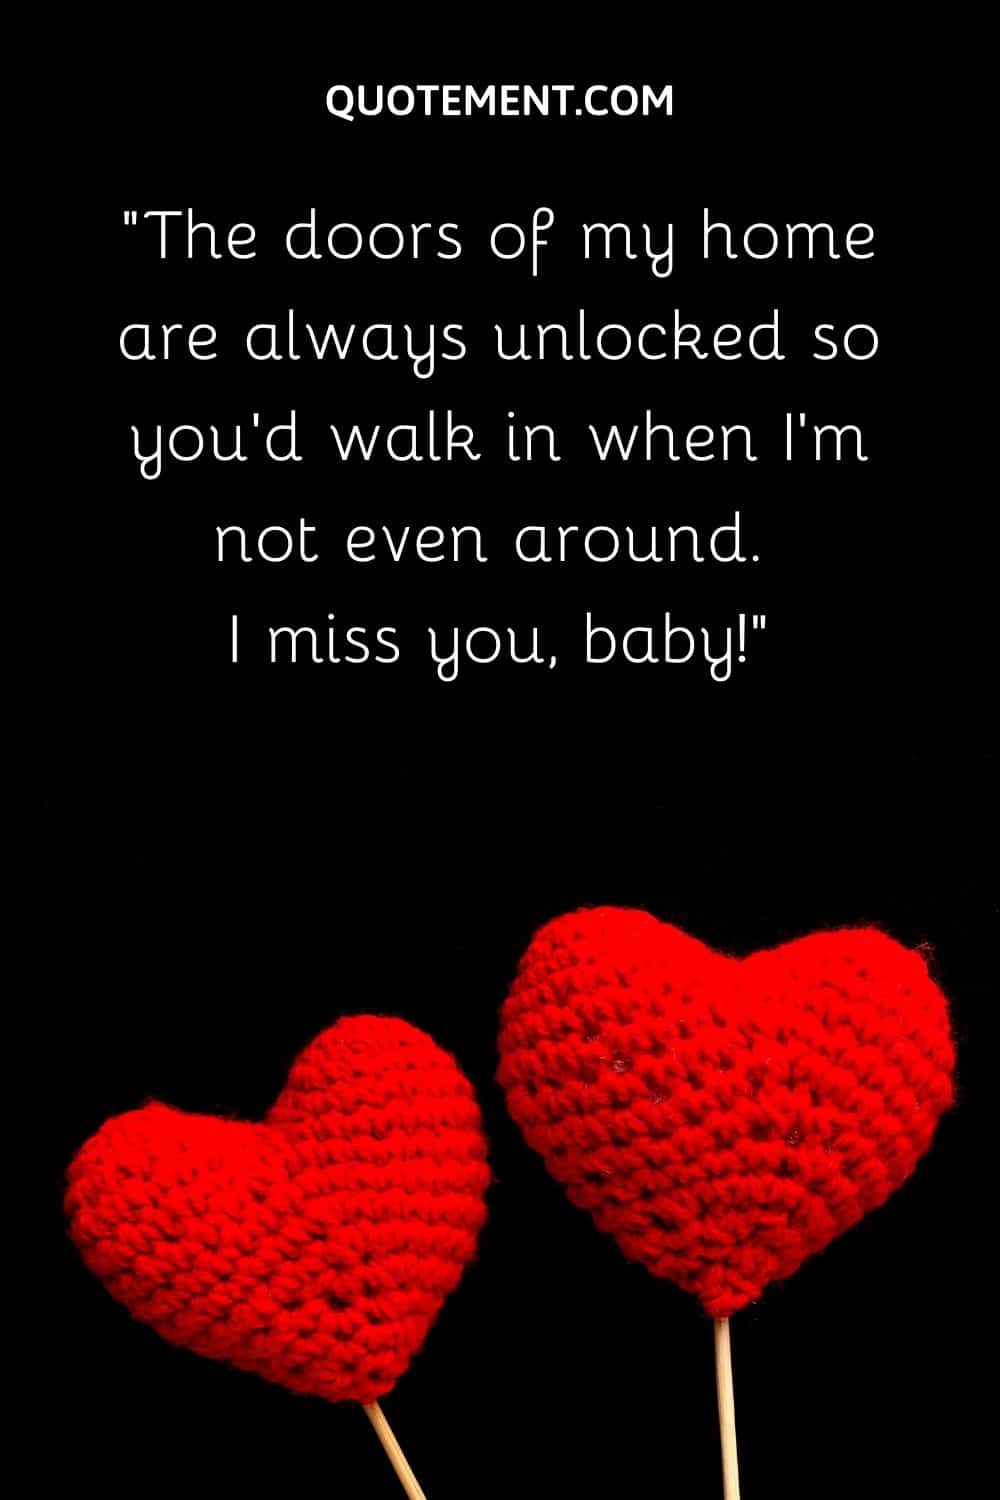 The doors of my home are always unlocked so you'd walk in when I'm not even around. I miss you, baby!